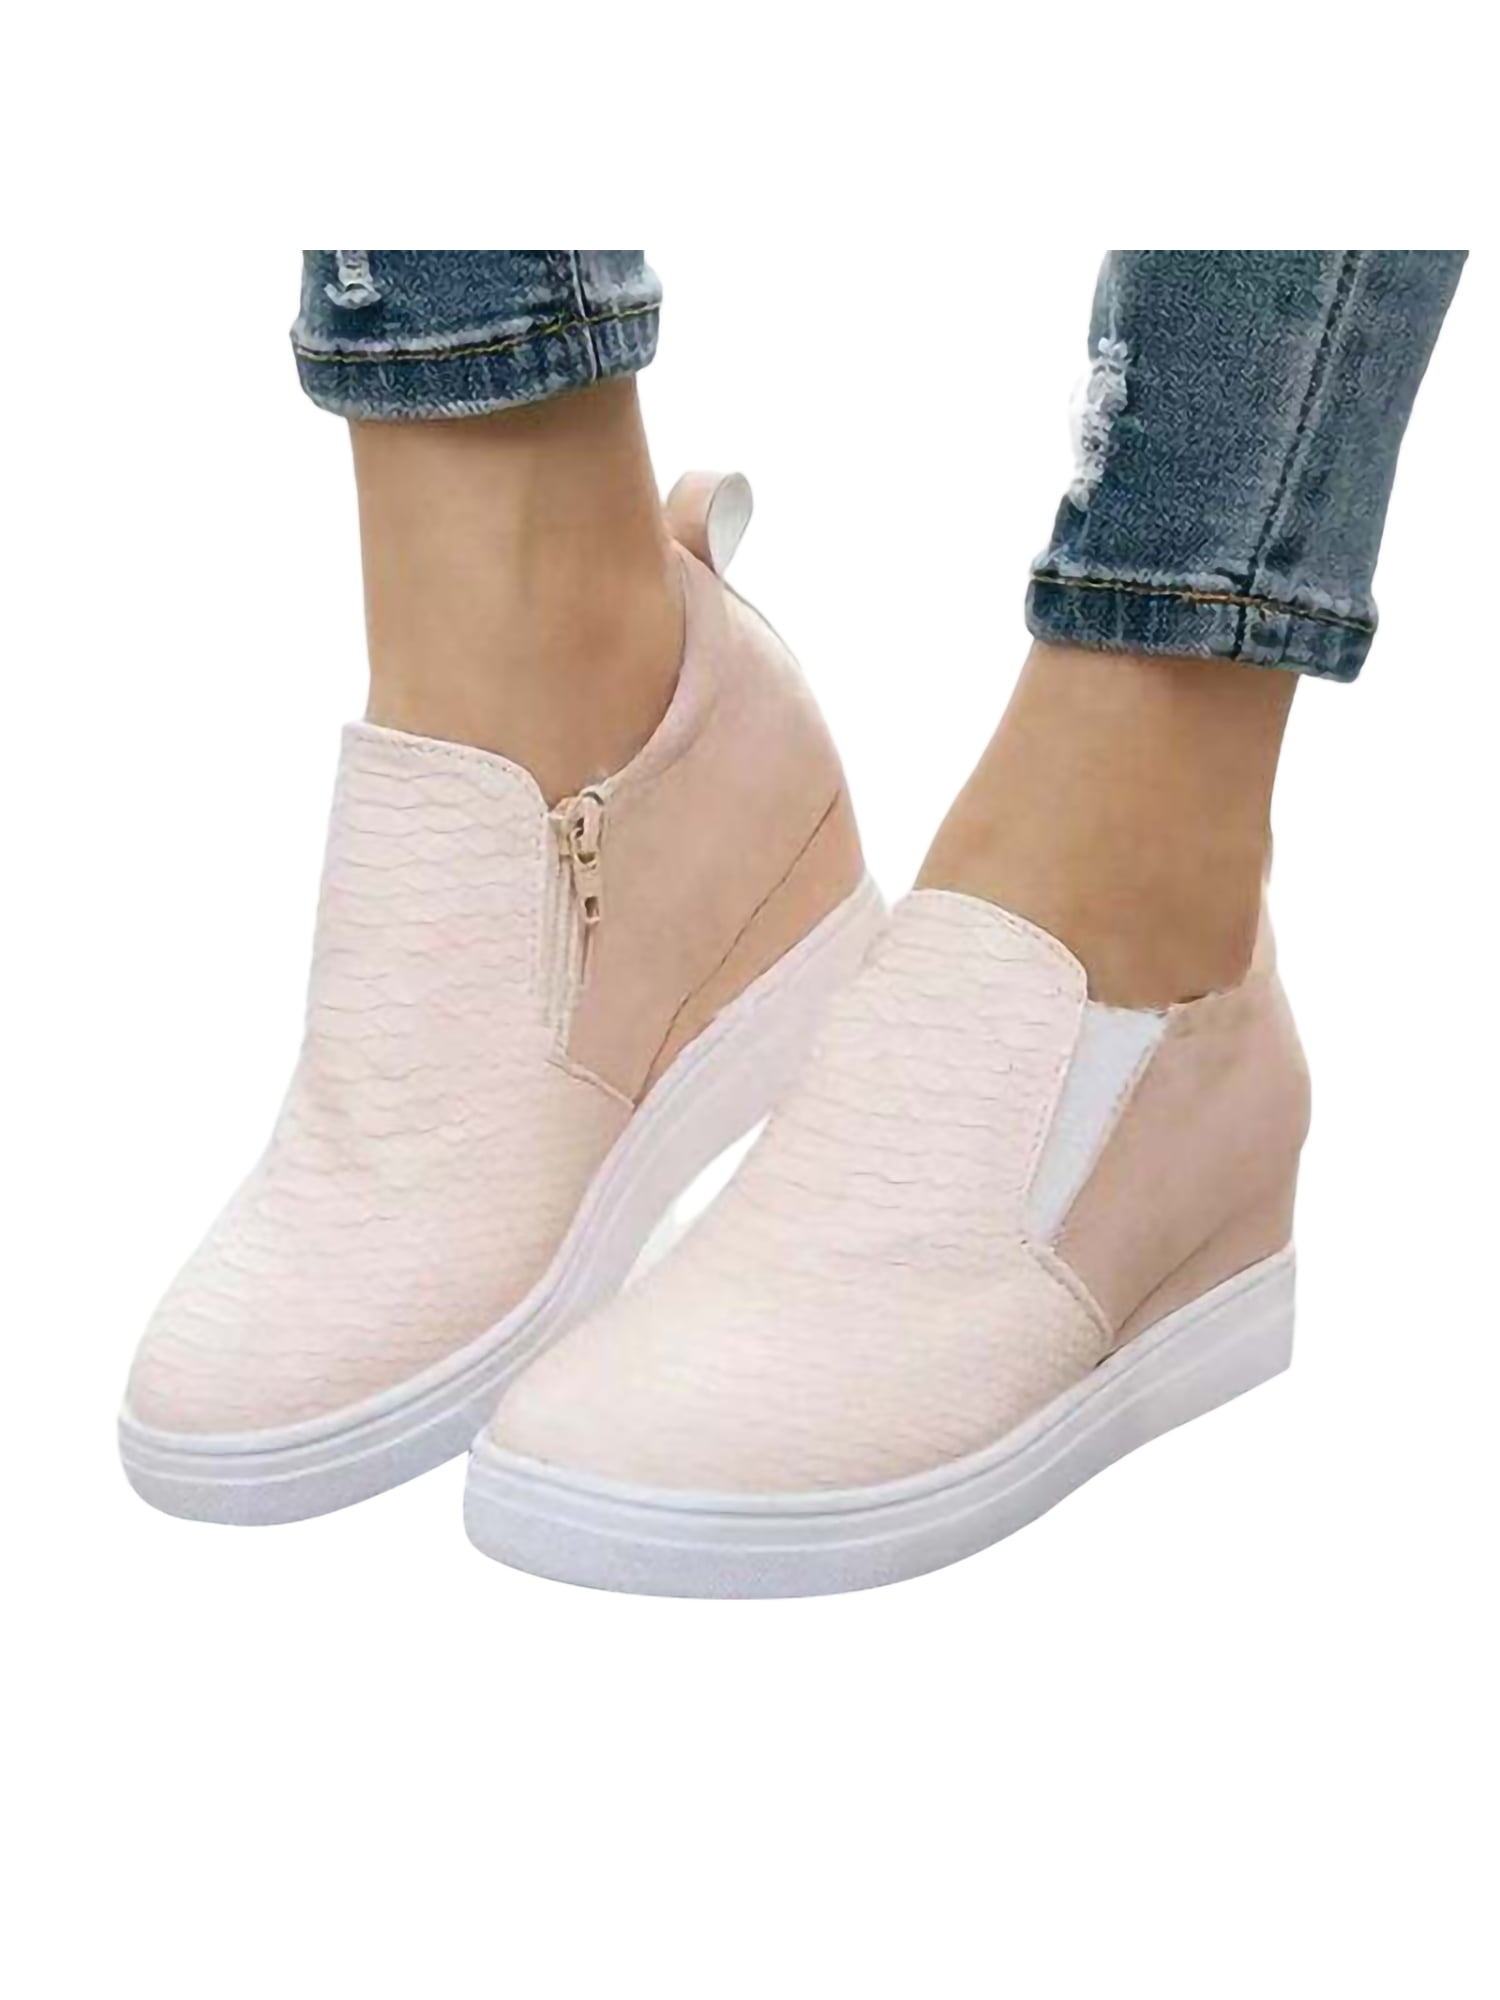 Women's  Hidden Wedge Heel Pumps Casual Fashion Sneakers Slip On Loafers Shoes 